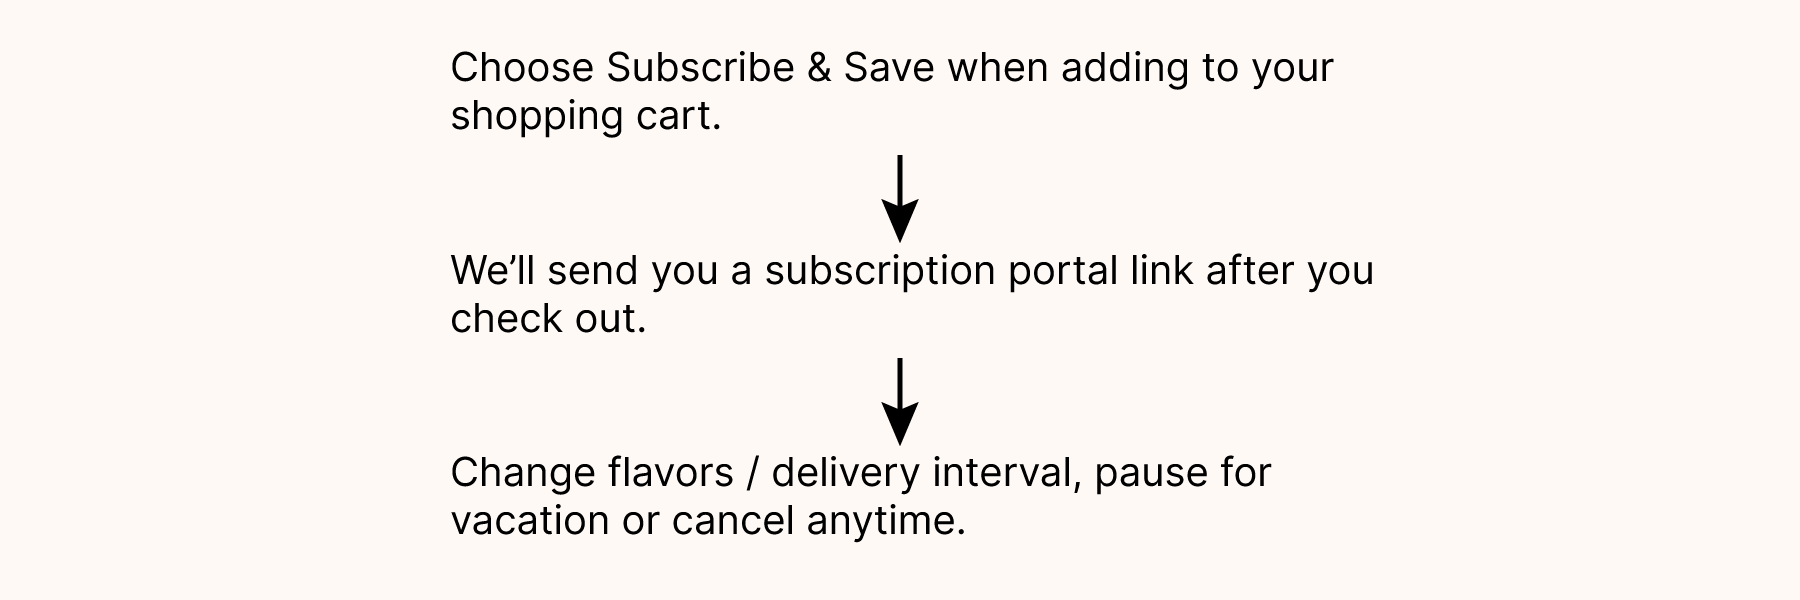 Choose Subscribe & Save when adding to your shopping cart.   We’ll send you a subscription portal link after you check out.  Change flavors / delivery interval, pause for vacation or cancel anytime.